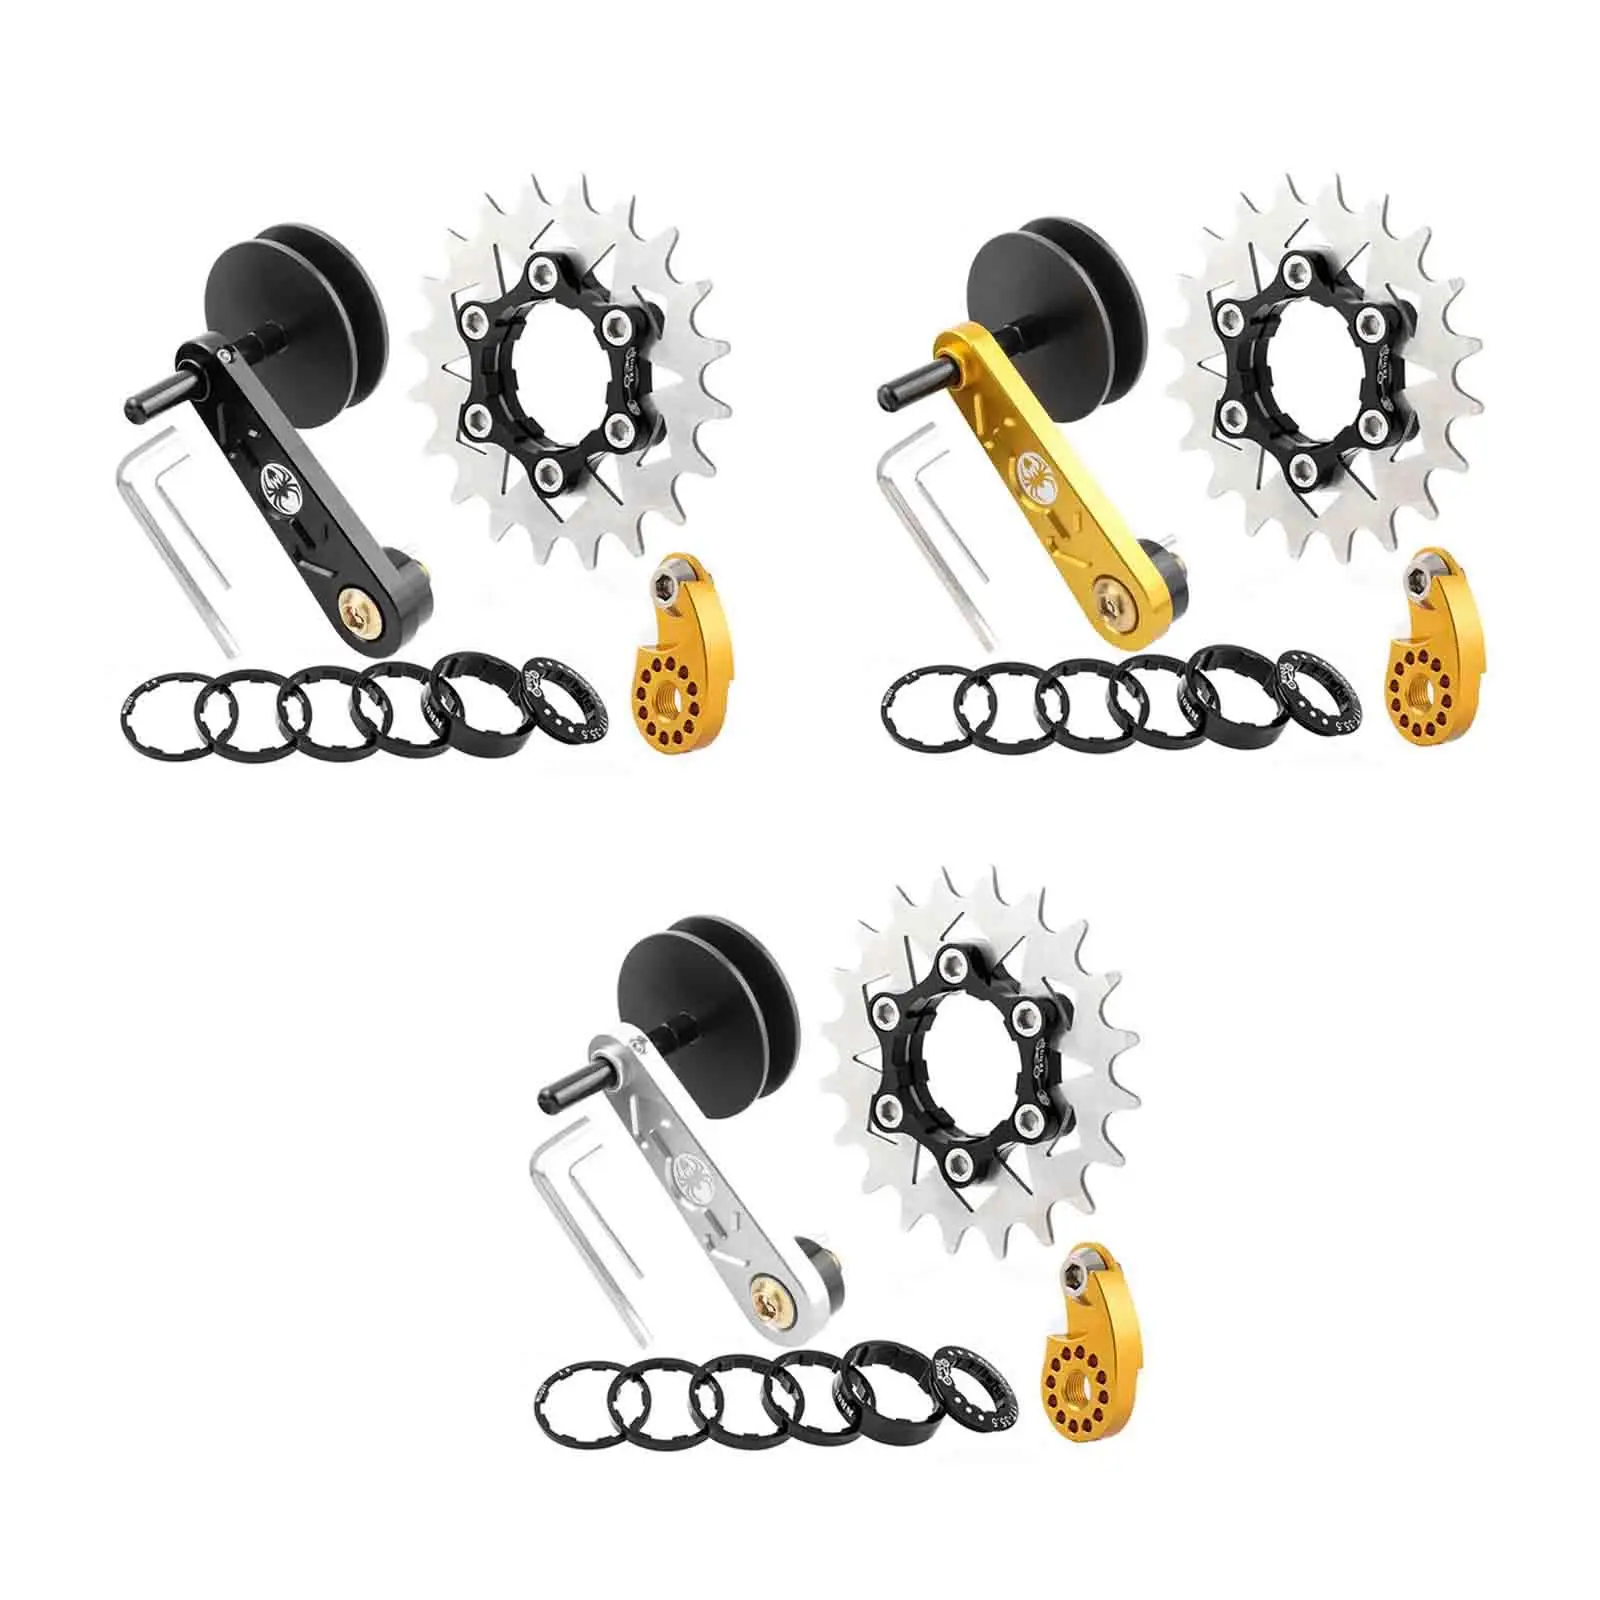 

Single Speed Conversion Set 20T Flywheel Outdoor Riding Replacement Base Gaskets Bike Cassette Spacer Bike Chain Stabilizer